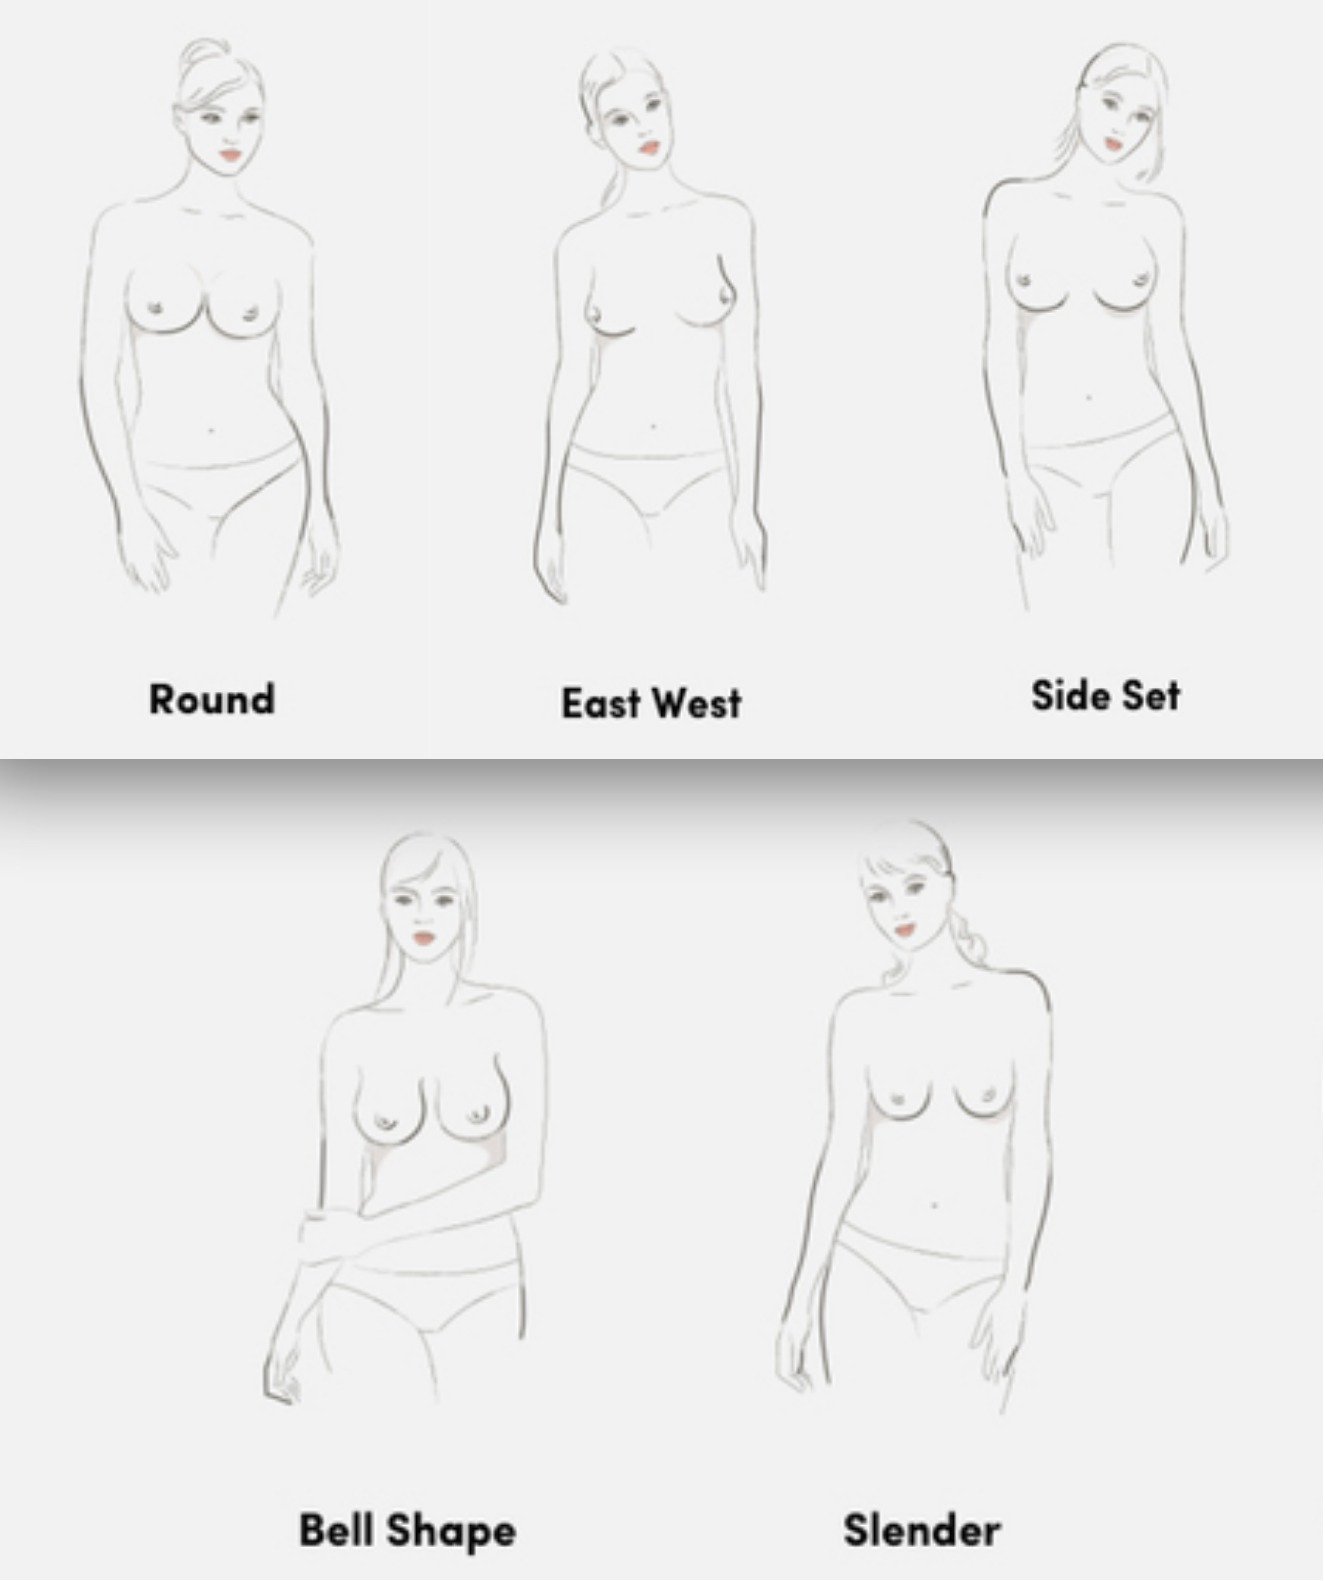 What Are East West Breasts?